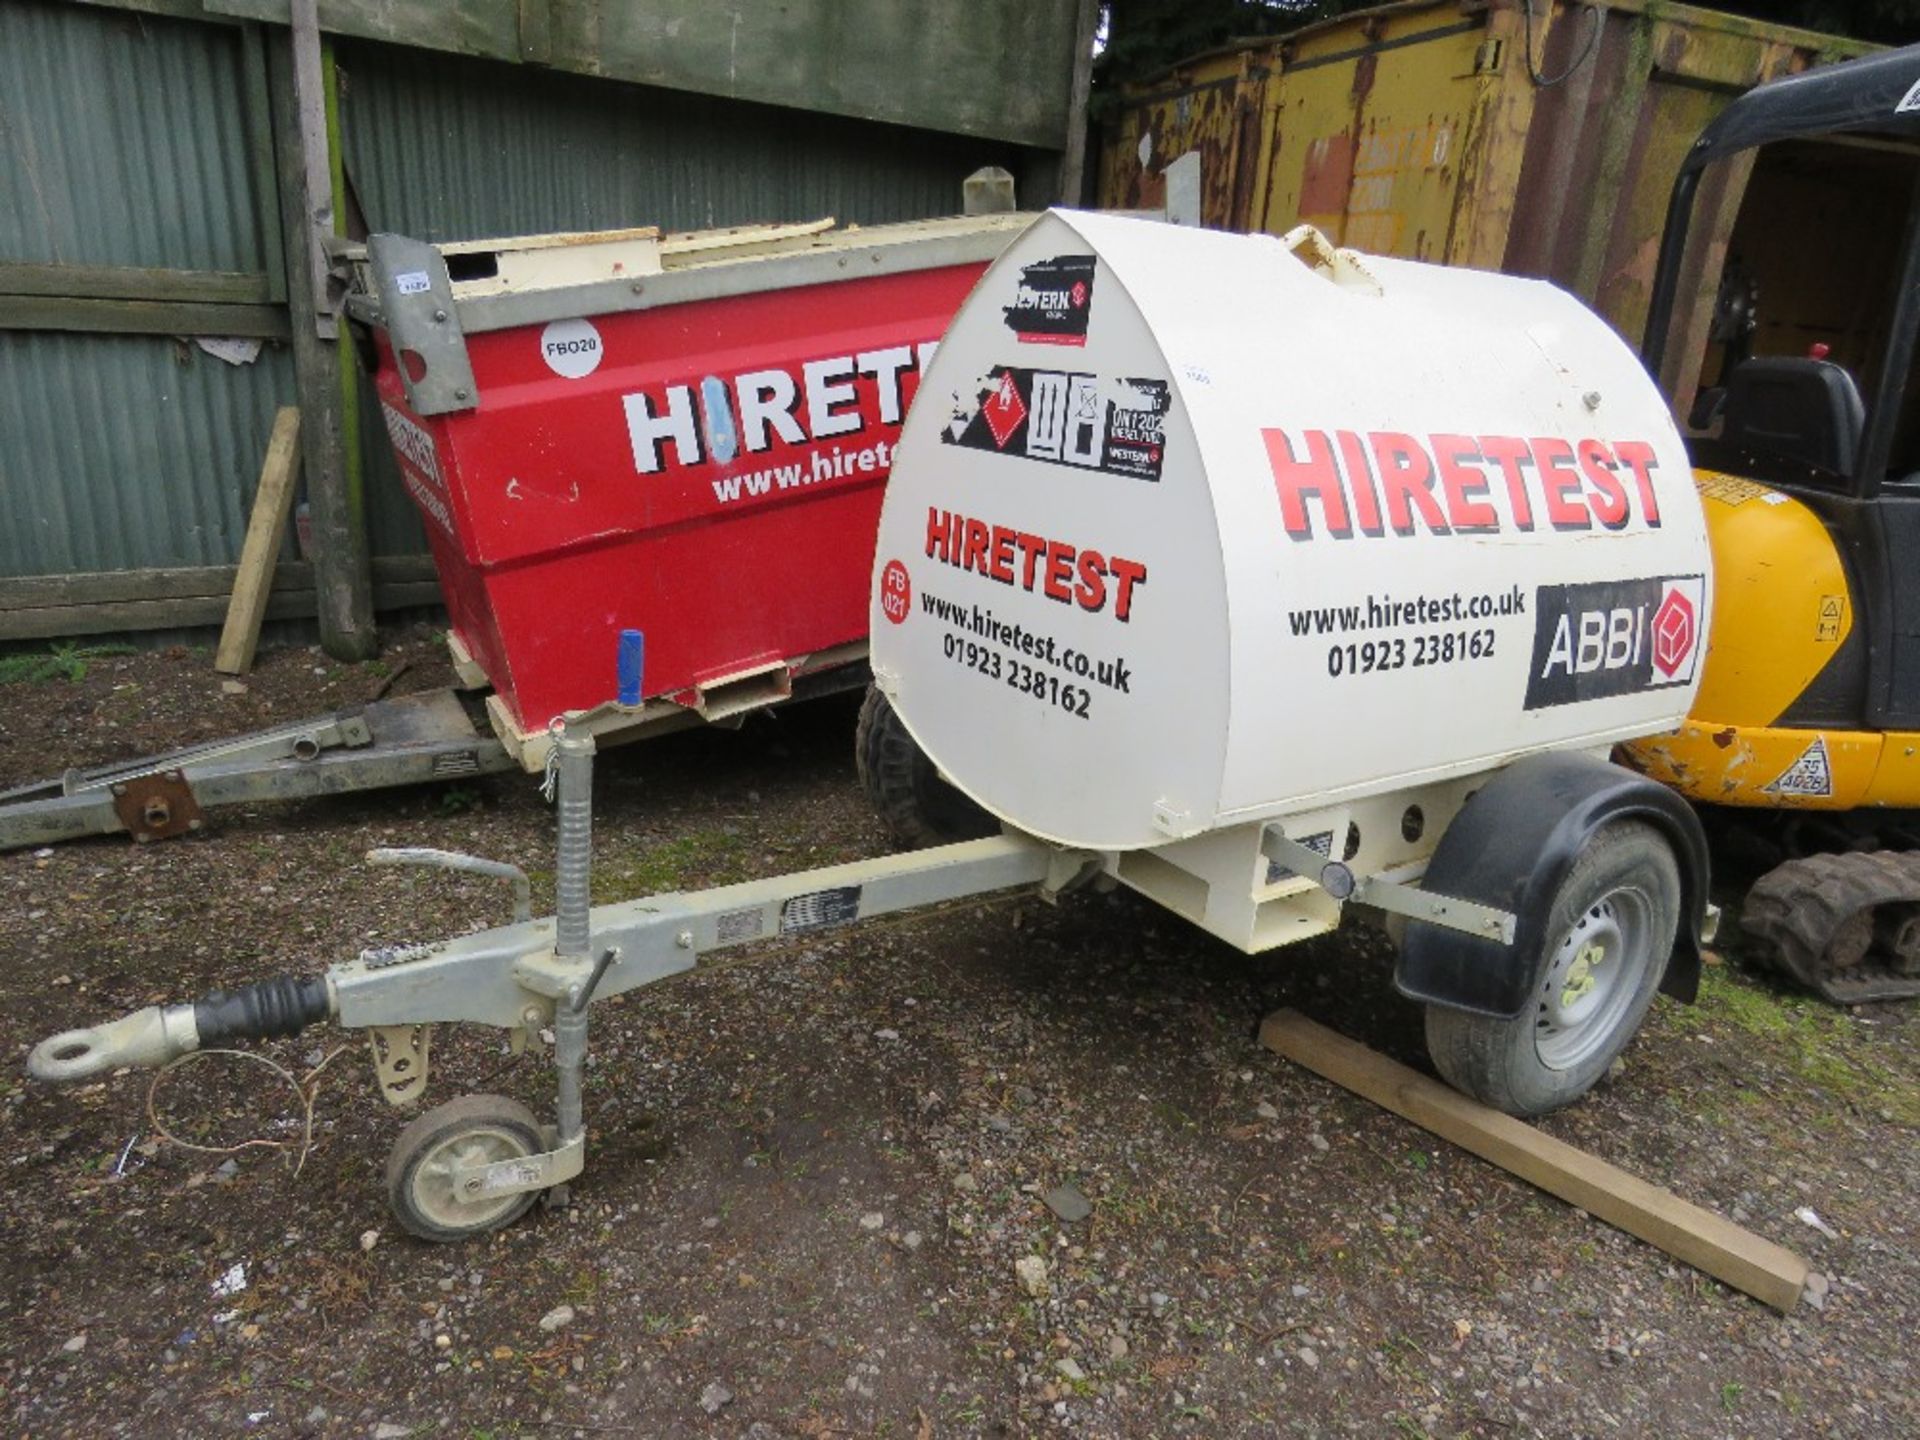 WESTERN ABBI TOWED FUEL BOWSER, 990 LITRE CAPACITY, YEAR 2020 BUILD. RING HITCH. 12VOLT ELECTRIC TRA